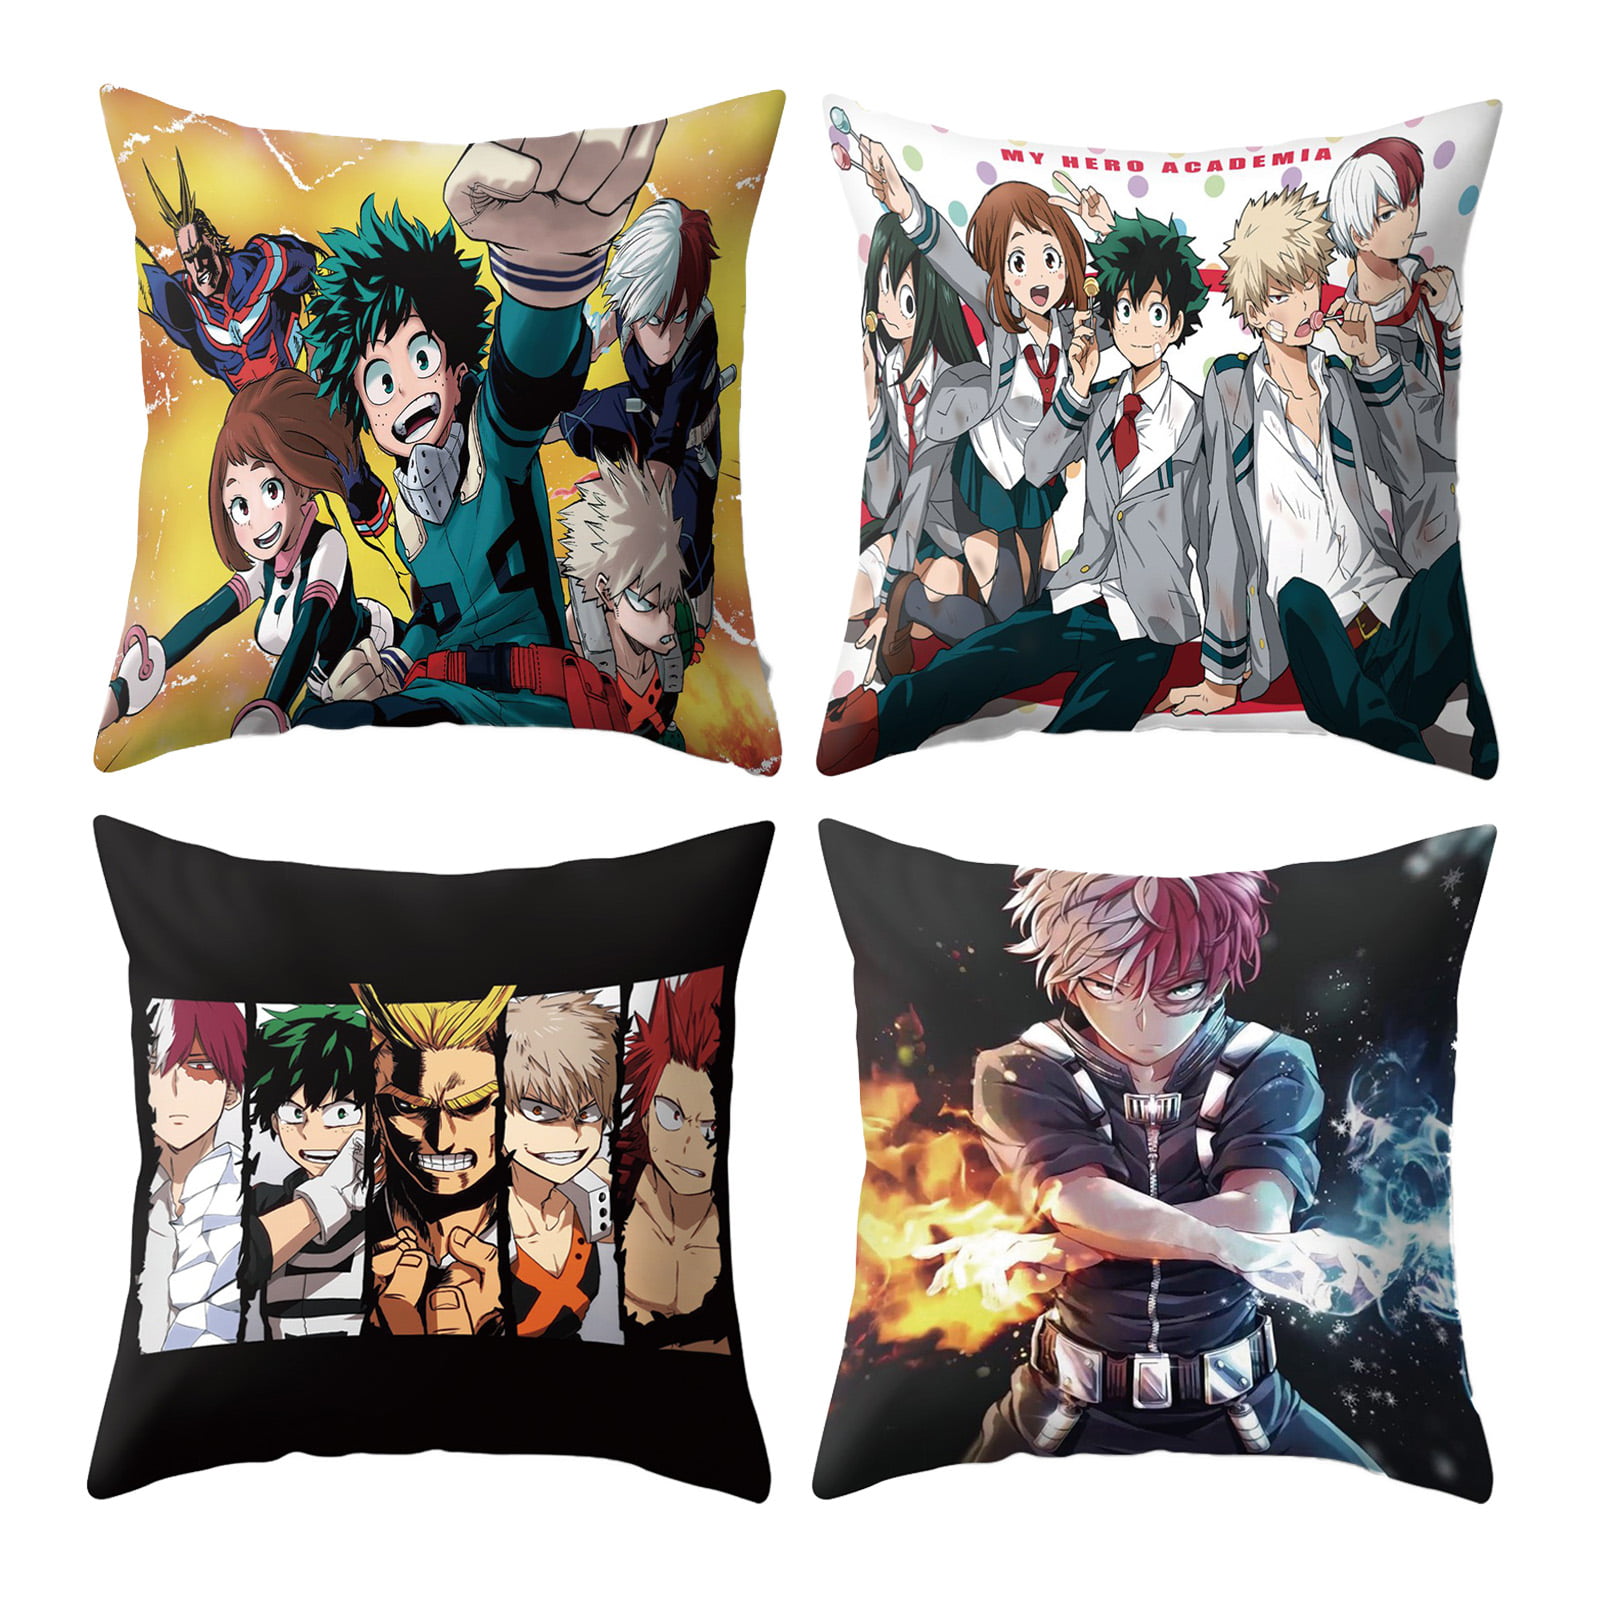 *Double Sided* Anime Fast Delivery! My Hero Academia Cushion Pillow 